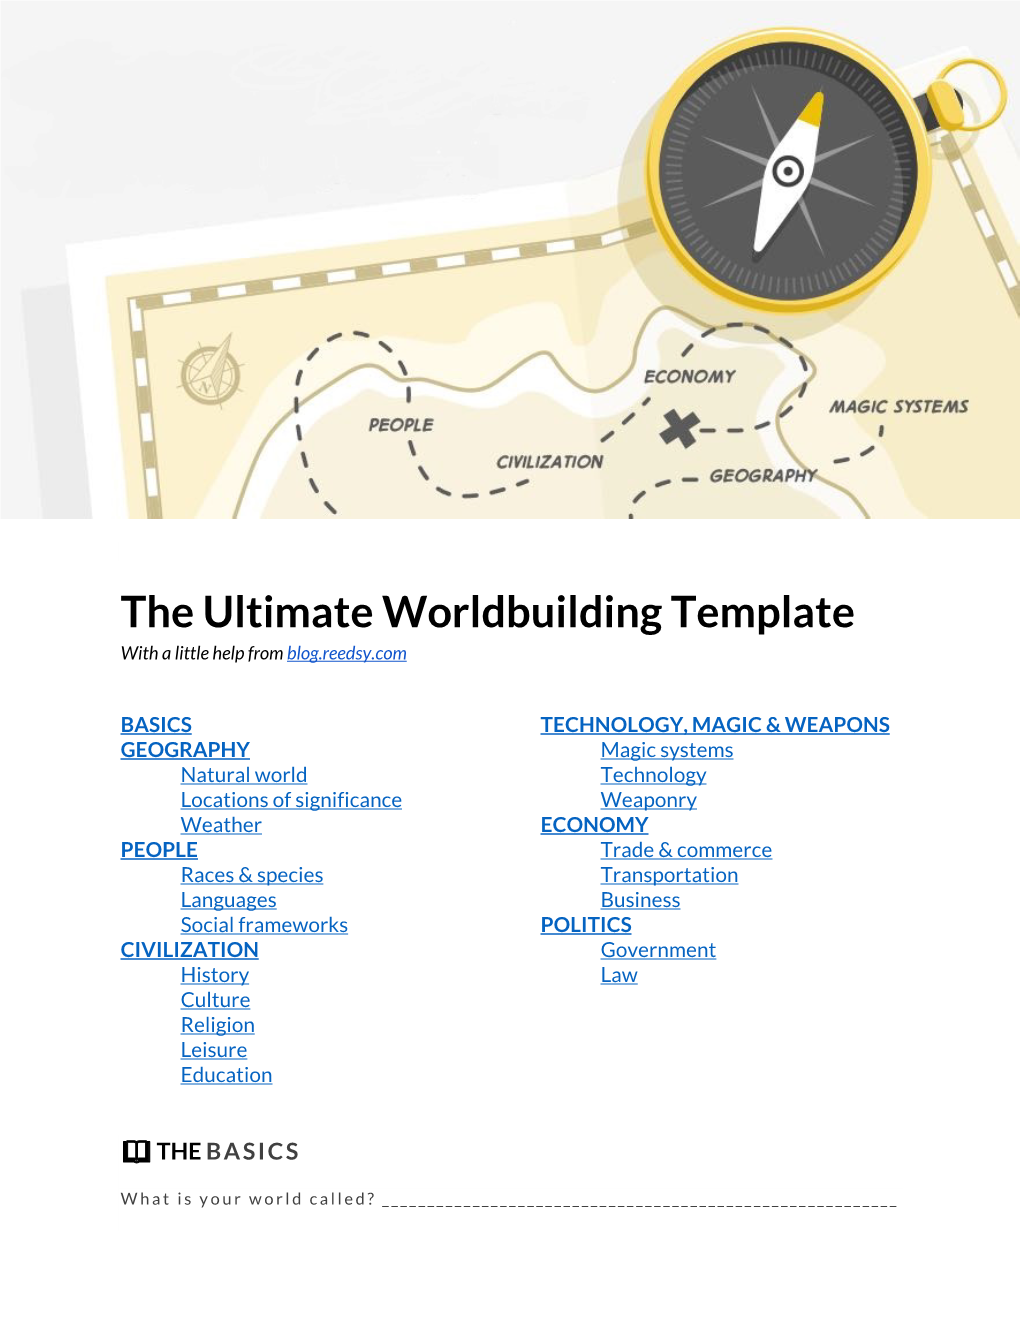 The Ultimate Worldbuilding Template with a Little Help from Blog.Reedsy.Com